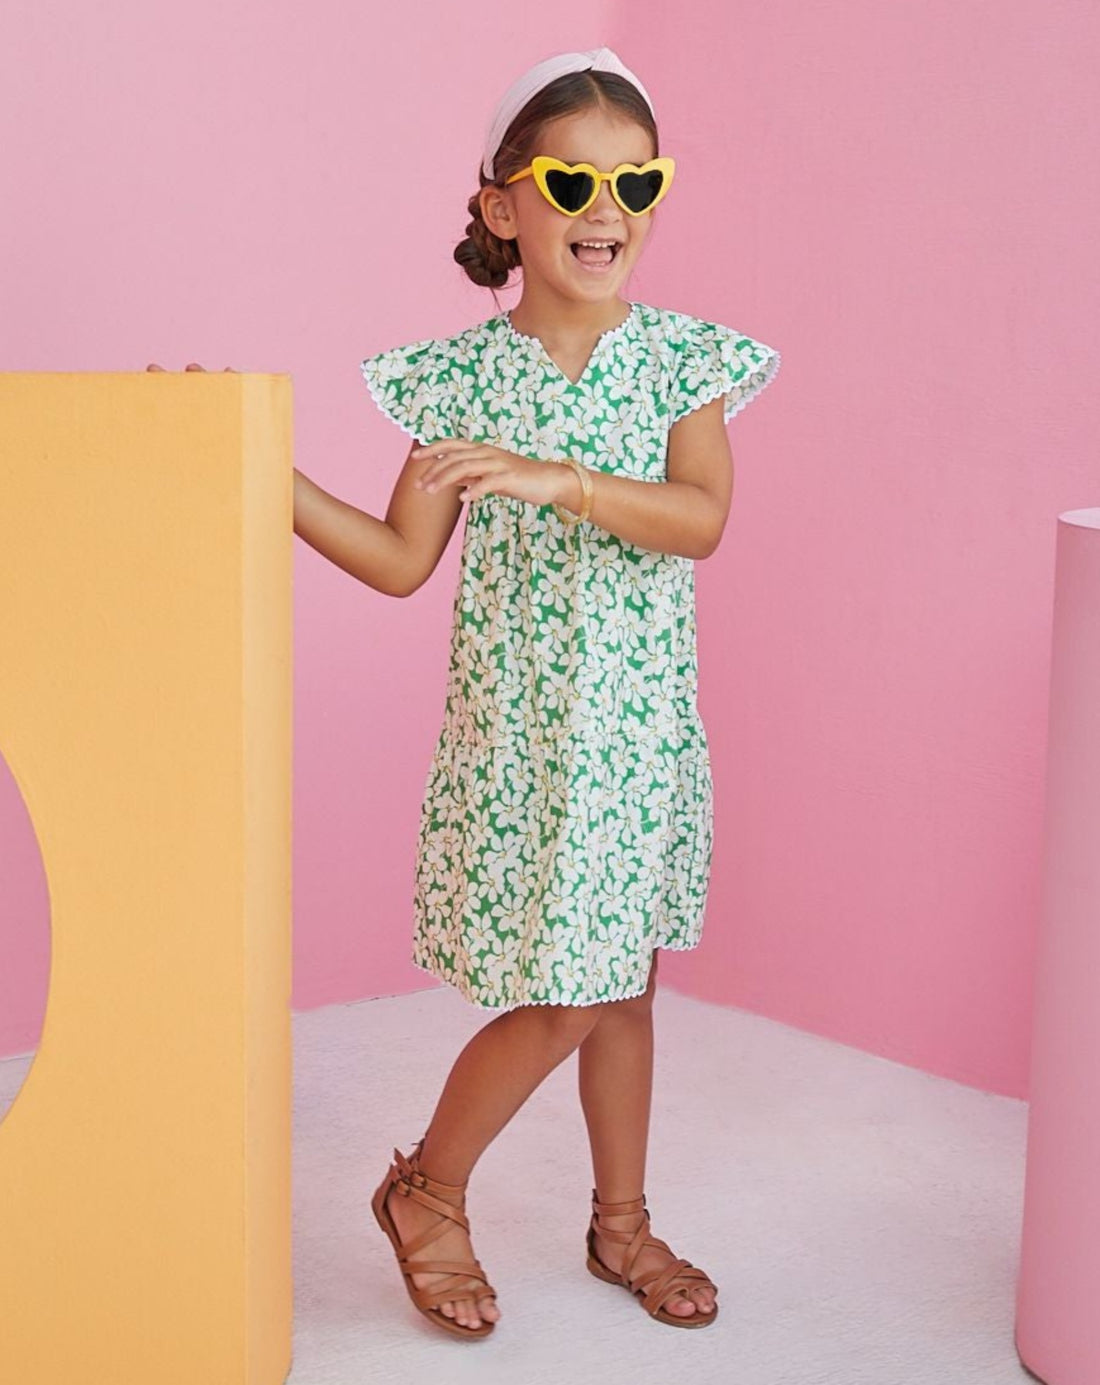 BISBY girl wearing our Positano Dress in Piccadilly Lawn. Has scalloped edges and a v-neck. The base color of dress is a beautiful green with white and yellow floral arrangement